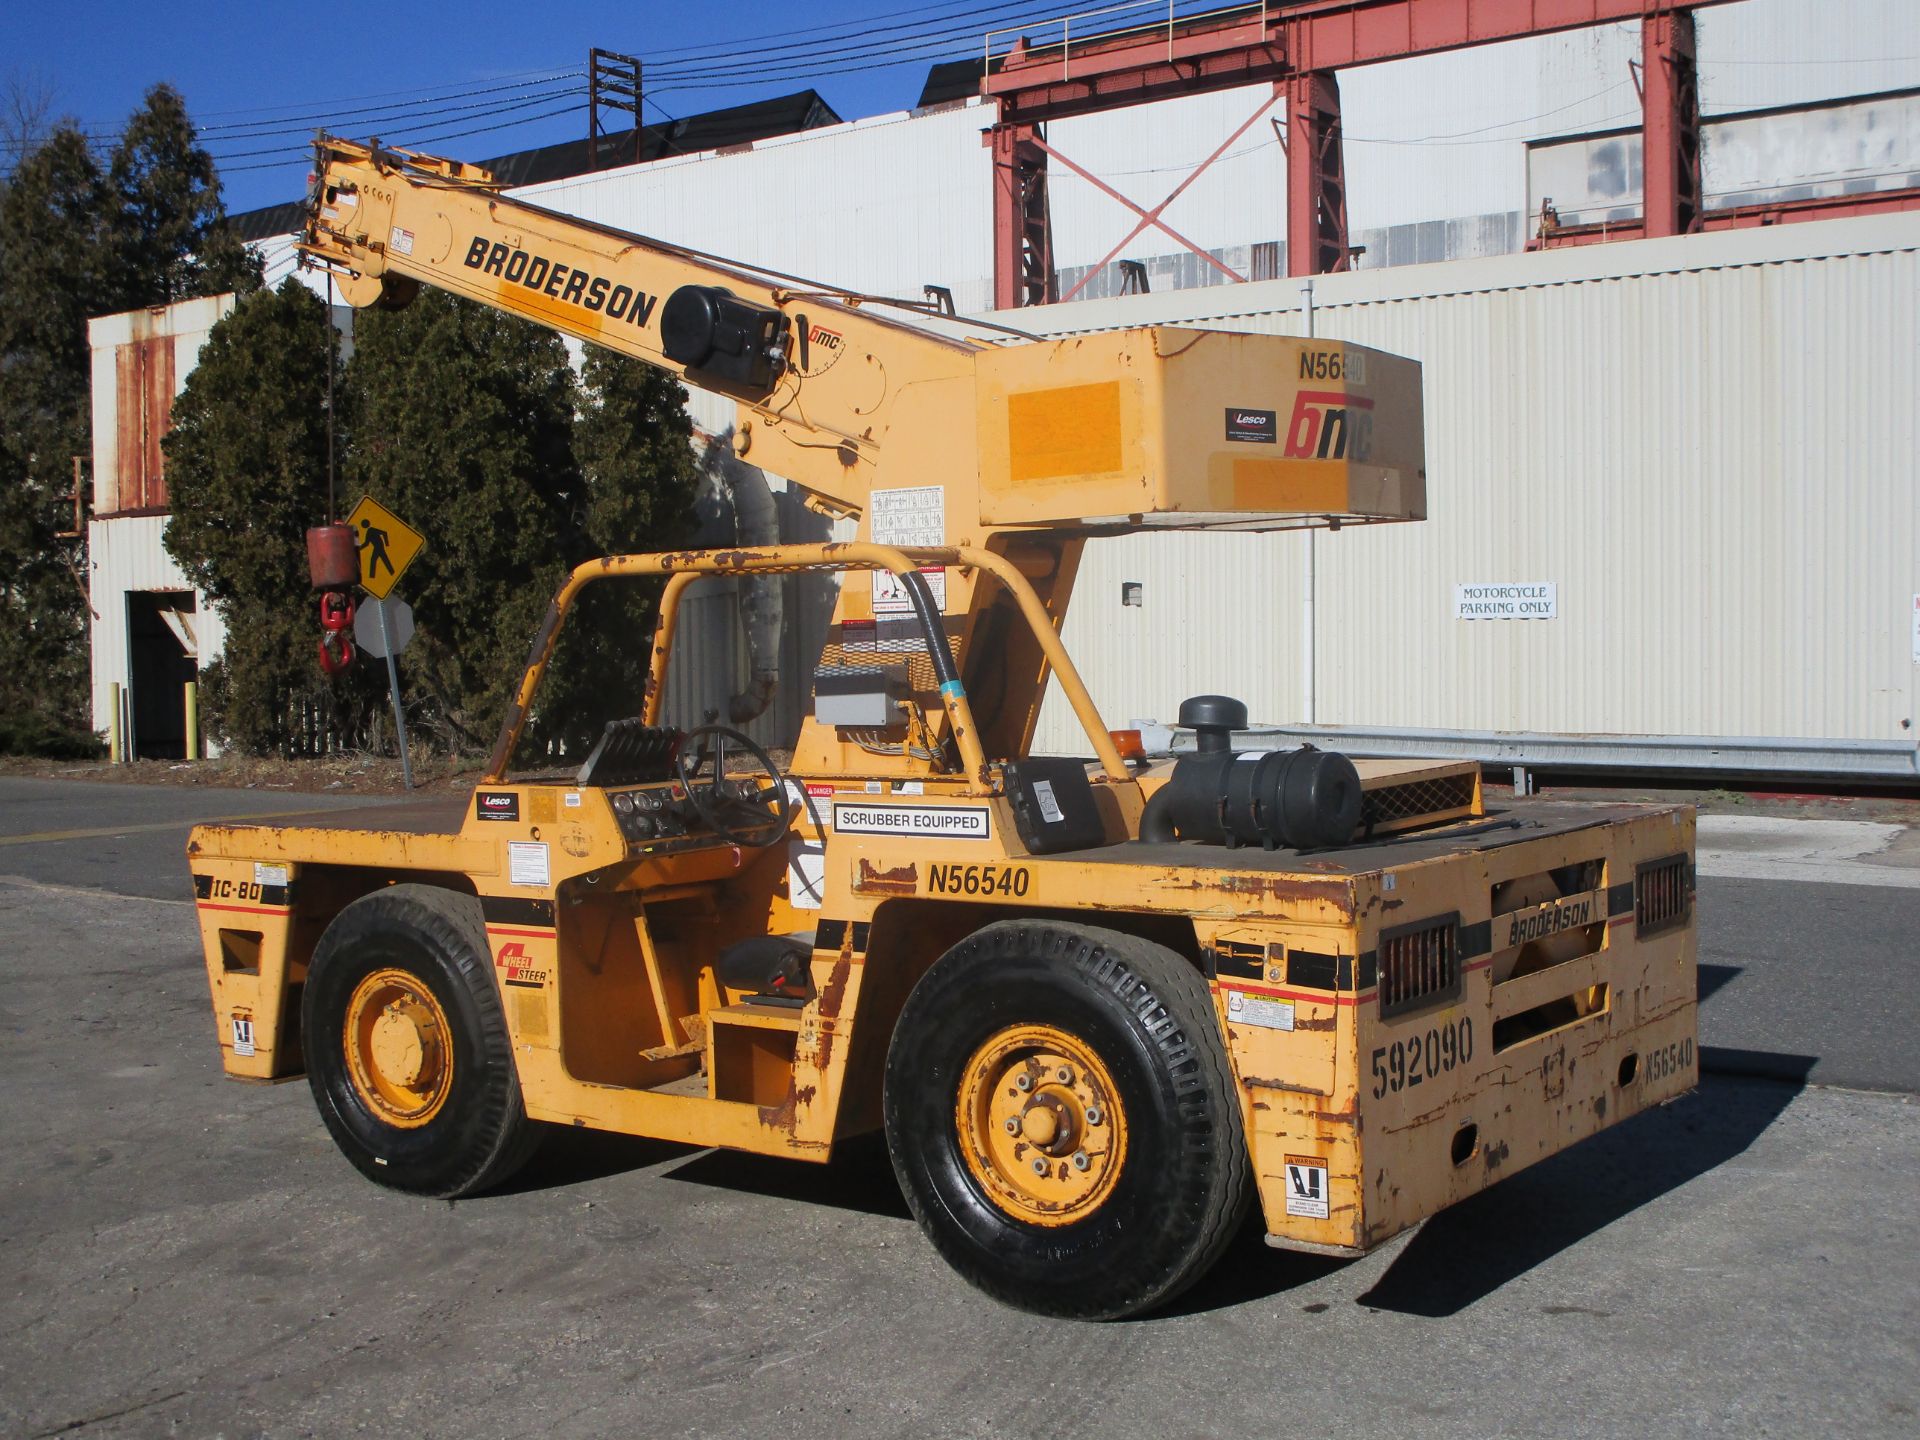 2008 Broderson IC-80-2G 40' Carry Deck Crane - Image 10 of 19